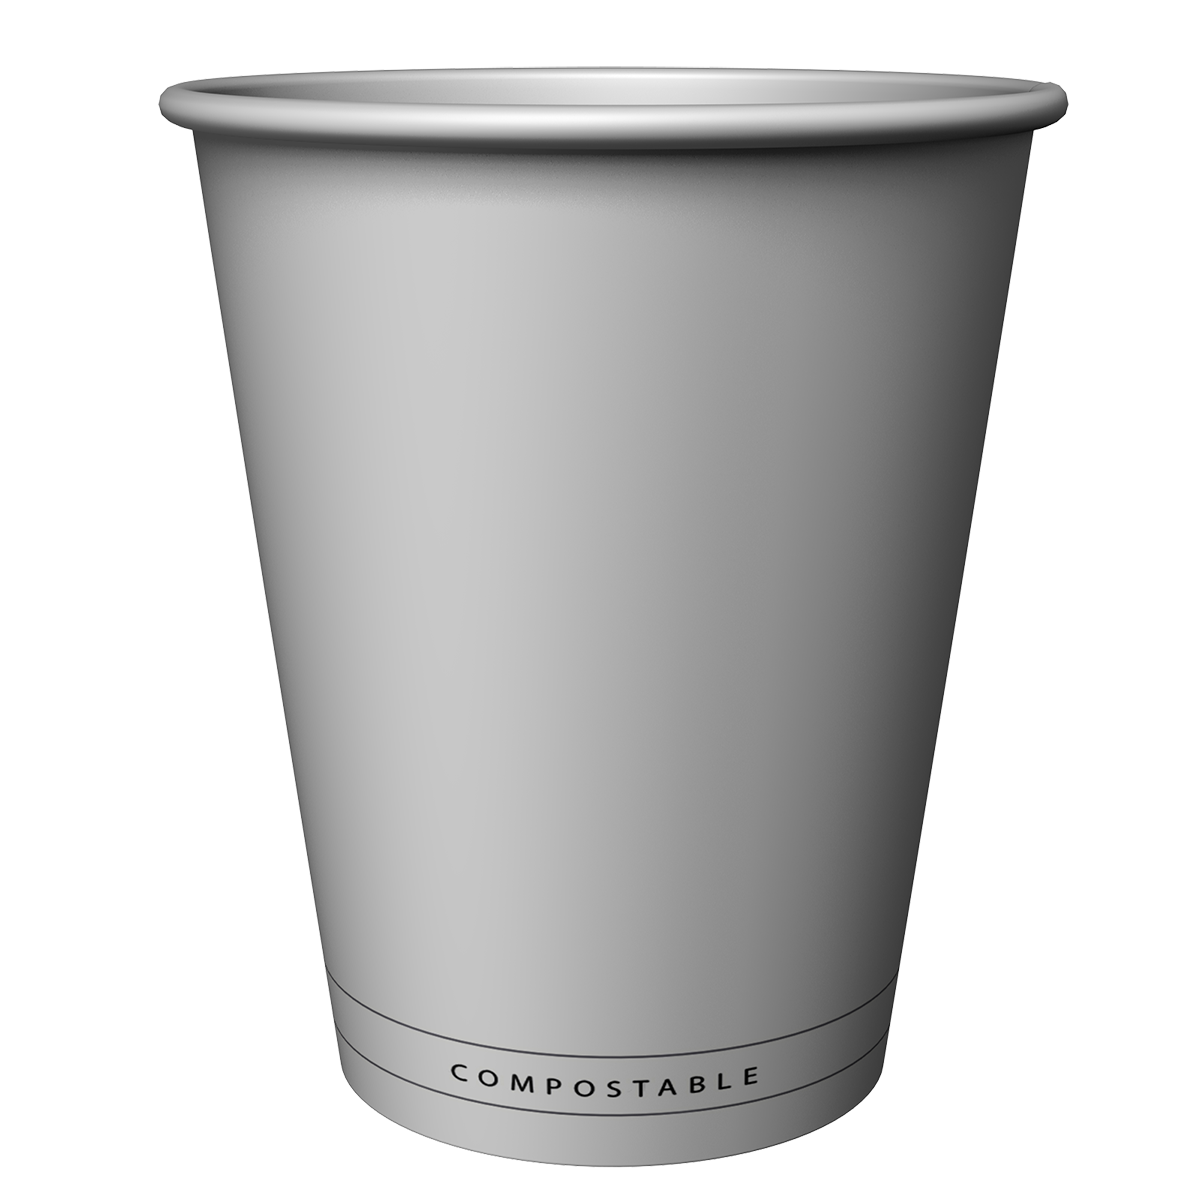 Compostable-12oz-front